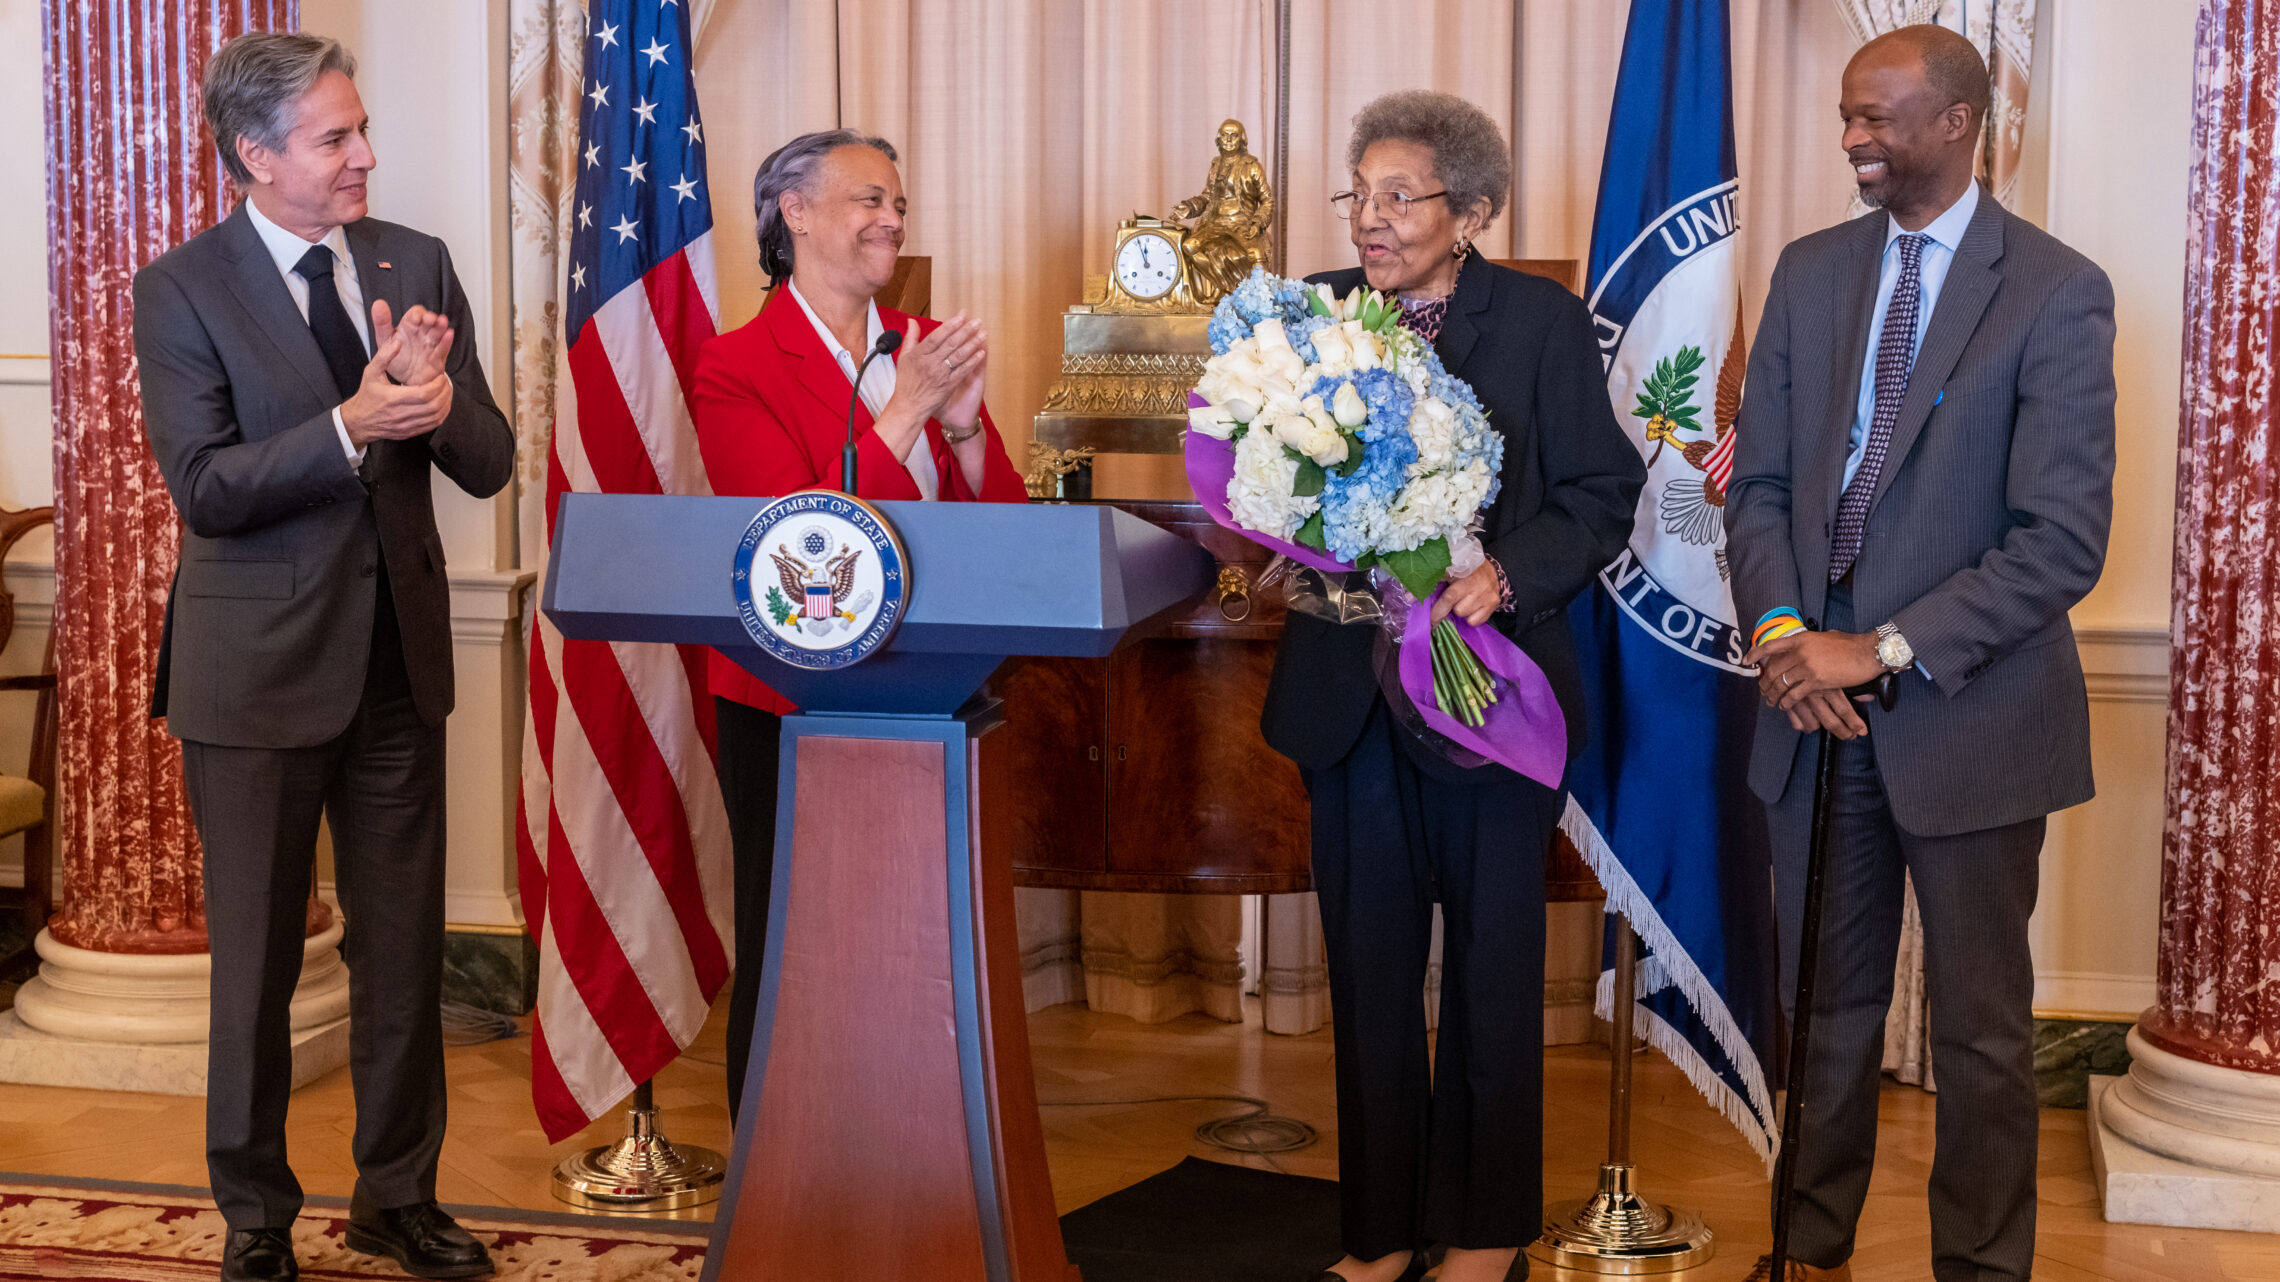 Secretary Blinken honors the author, Ambassador Ruth A. Davis, at the celebration of the 50th anniversary of the Thursday Luncheon Group, in Washington, D.C., on February 2, 2023 [State Department Photo]